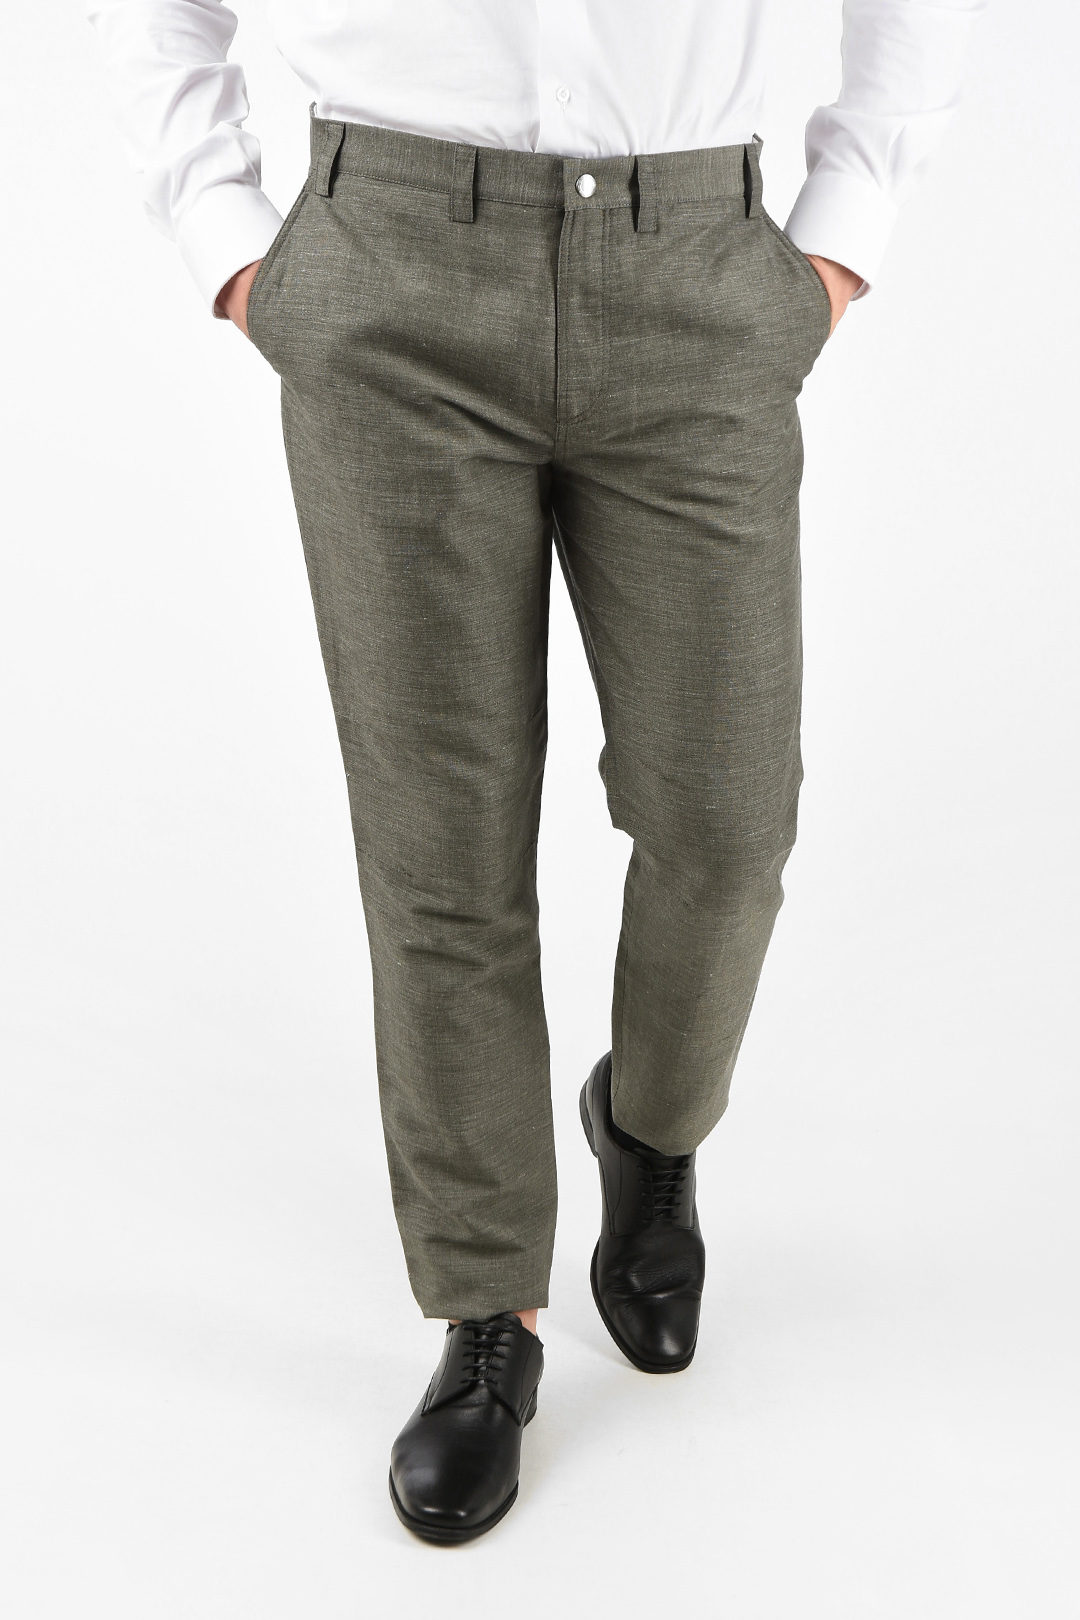 Brunello Cucinelli Linen and Wool LEISUR FIT Pants men - Glamood Outlet